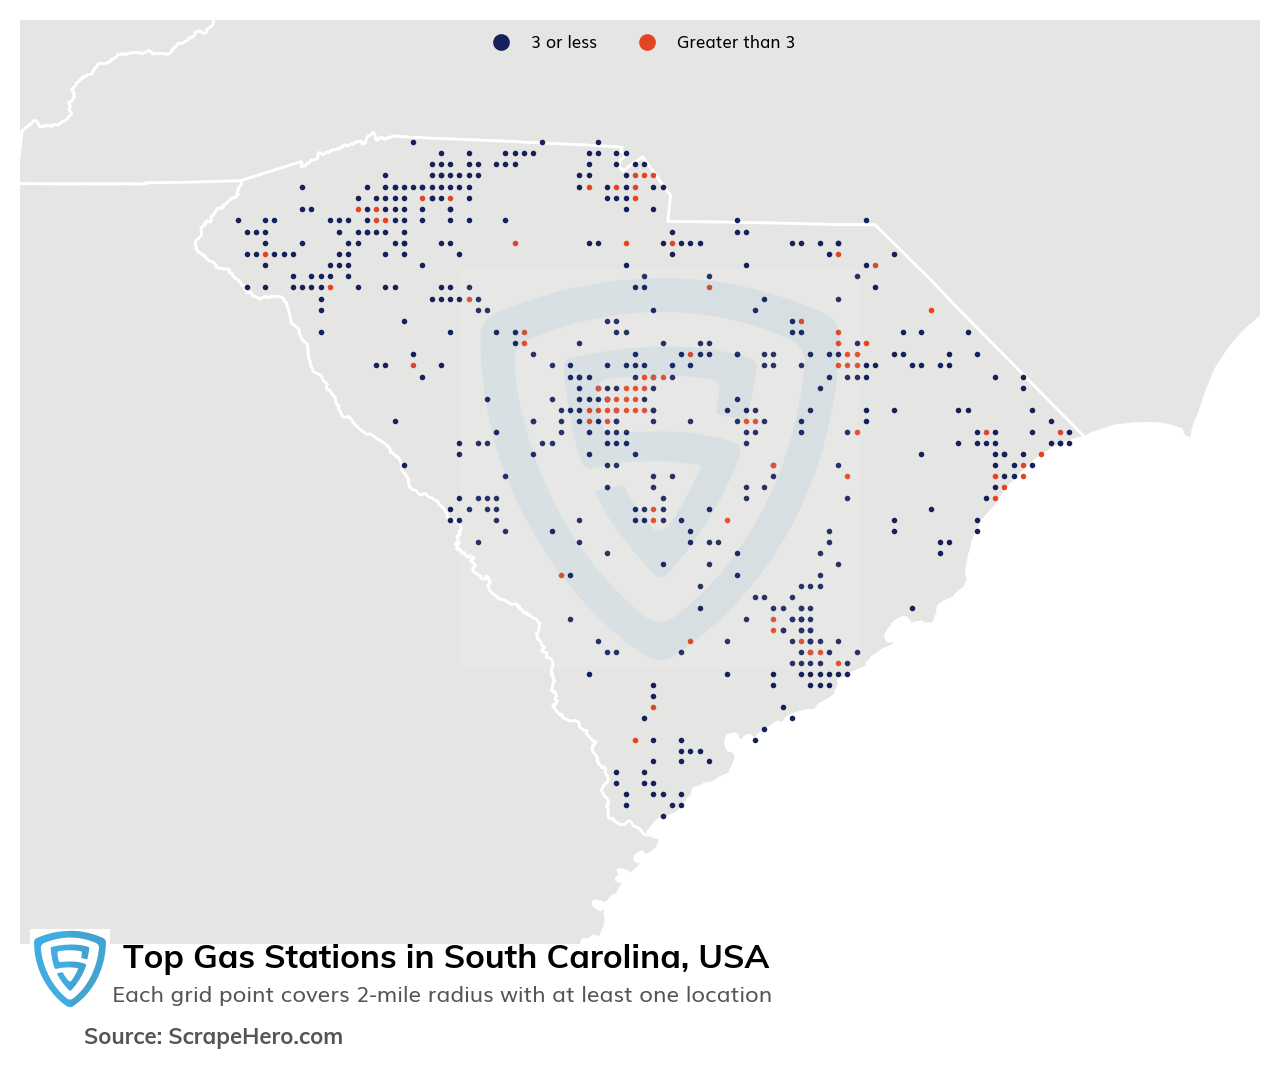 10 Largest Gas Stations In South Carolina In 2023 Based On Locations